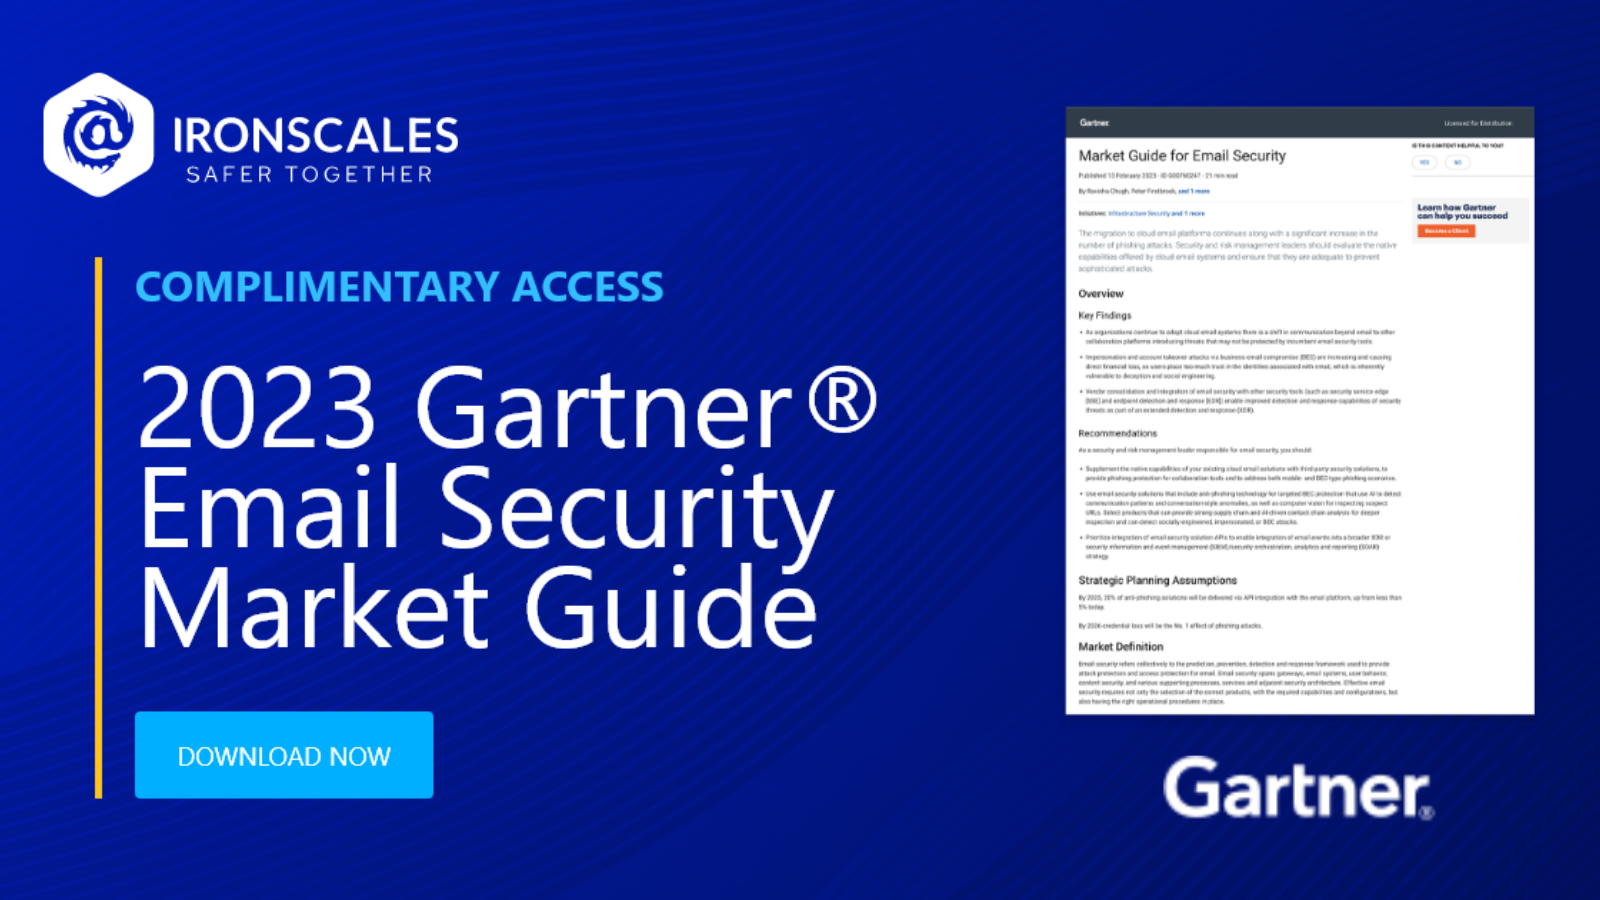 Gartner® Email Security Market Guide IRONSCALES